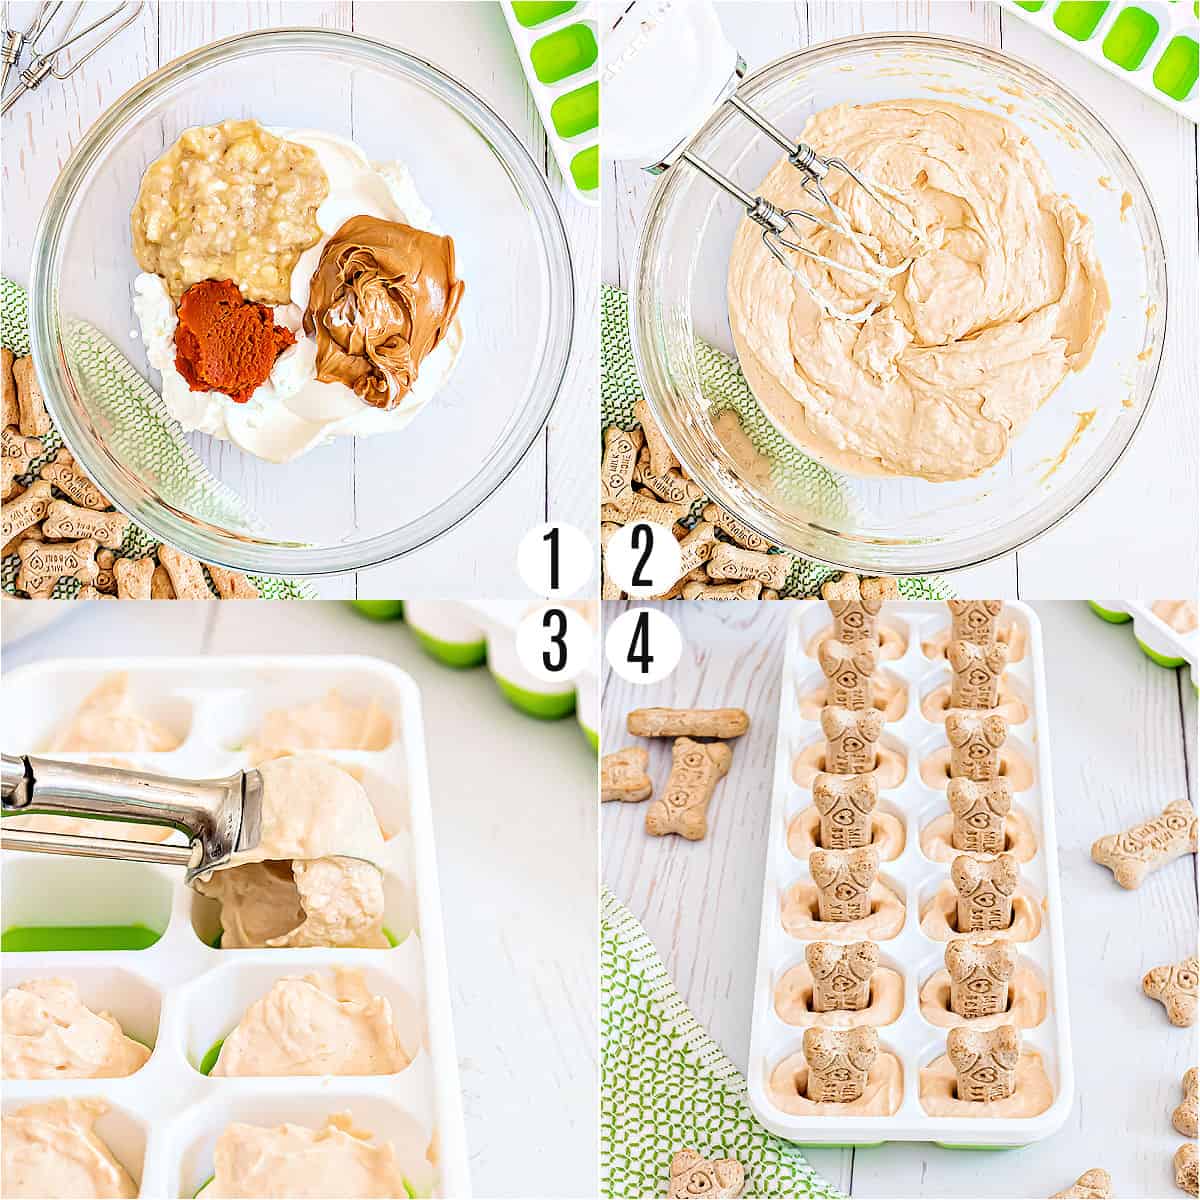 Step by step photos showing how to make dog ice cream pops.